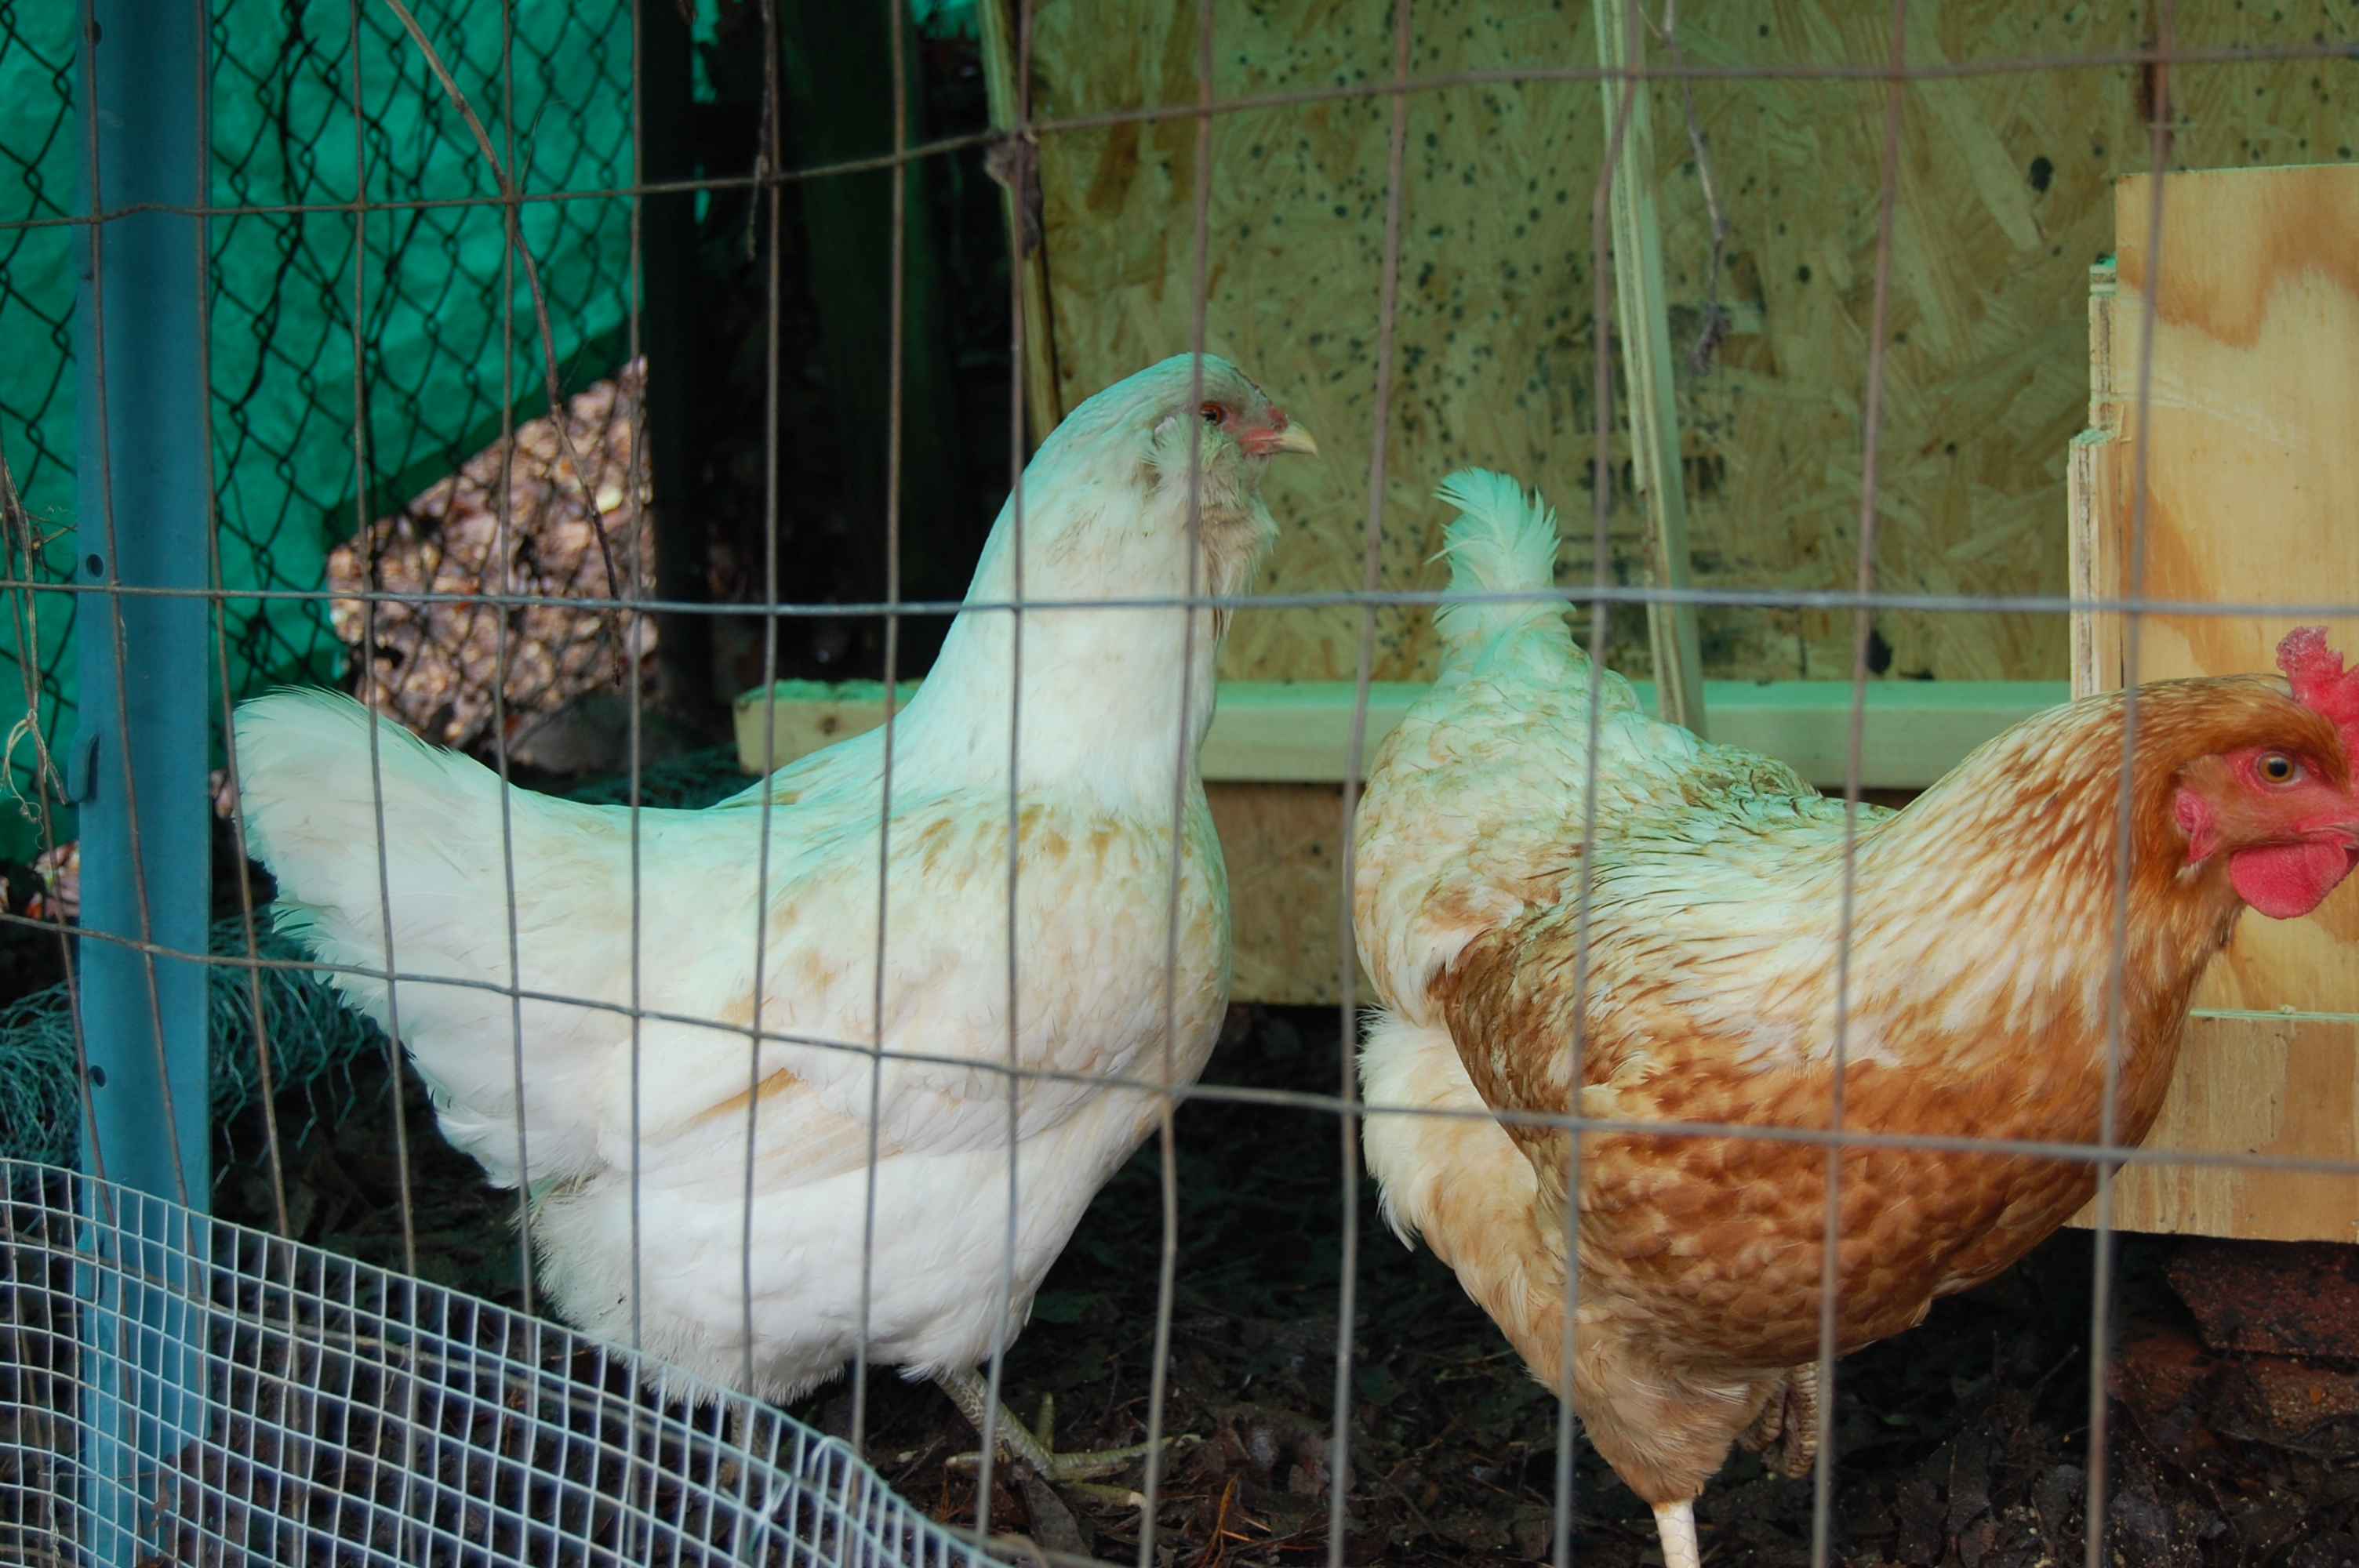 Becky (l)
Queeny (r)
***Chickens with names don't taste good!! - daddy*****
We won't be eating these girls.
Pet cemetery